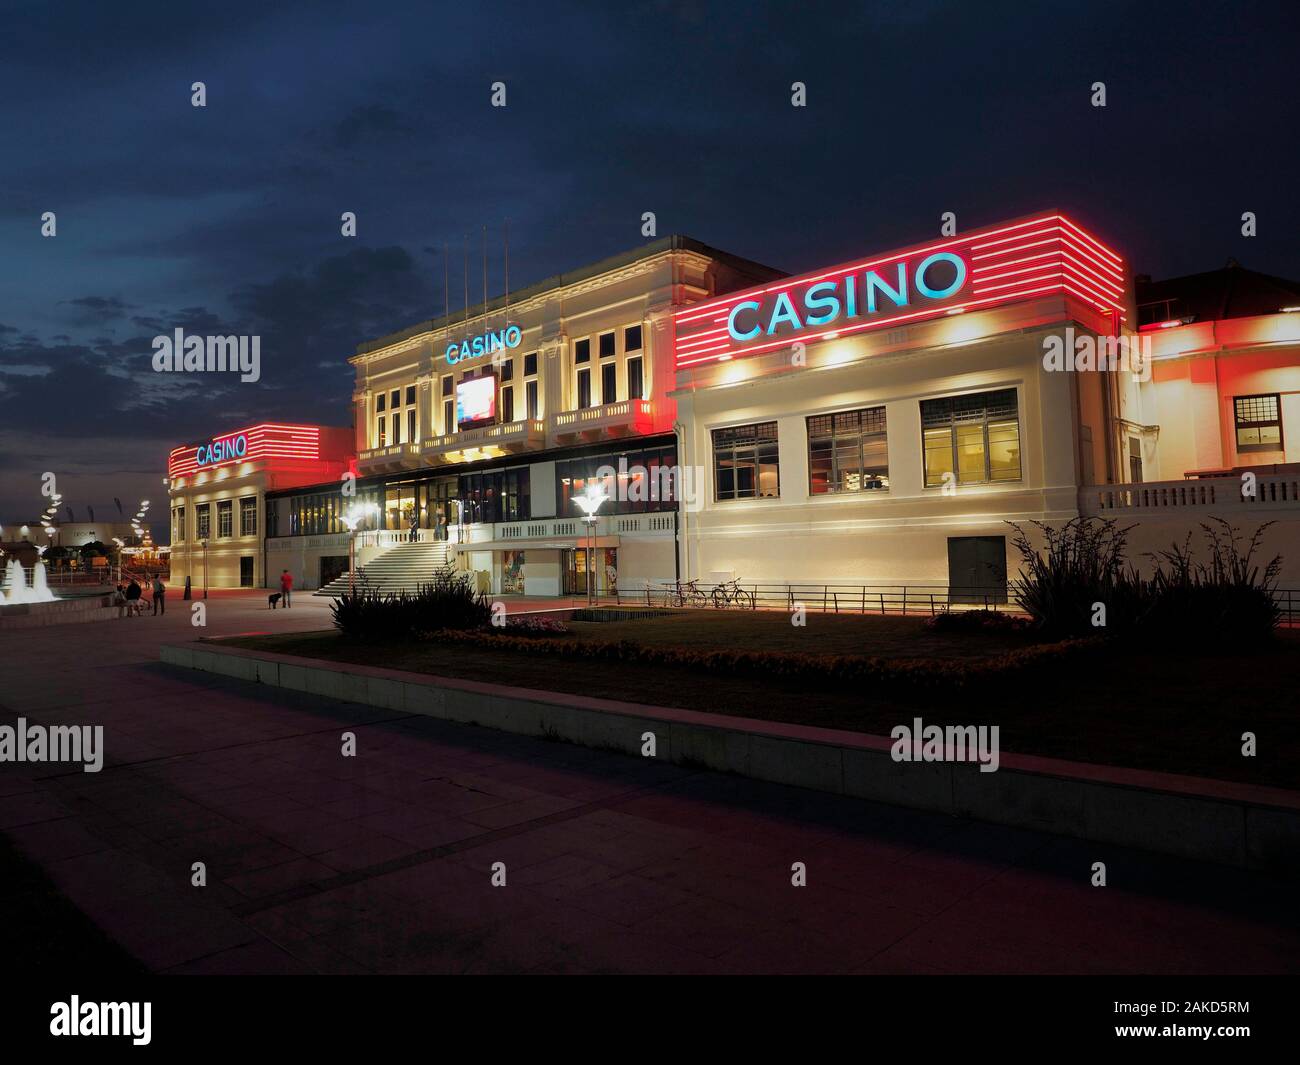 Evening shot of the casino building in Povoa de Varzim, northern Portugal Stock Photo